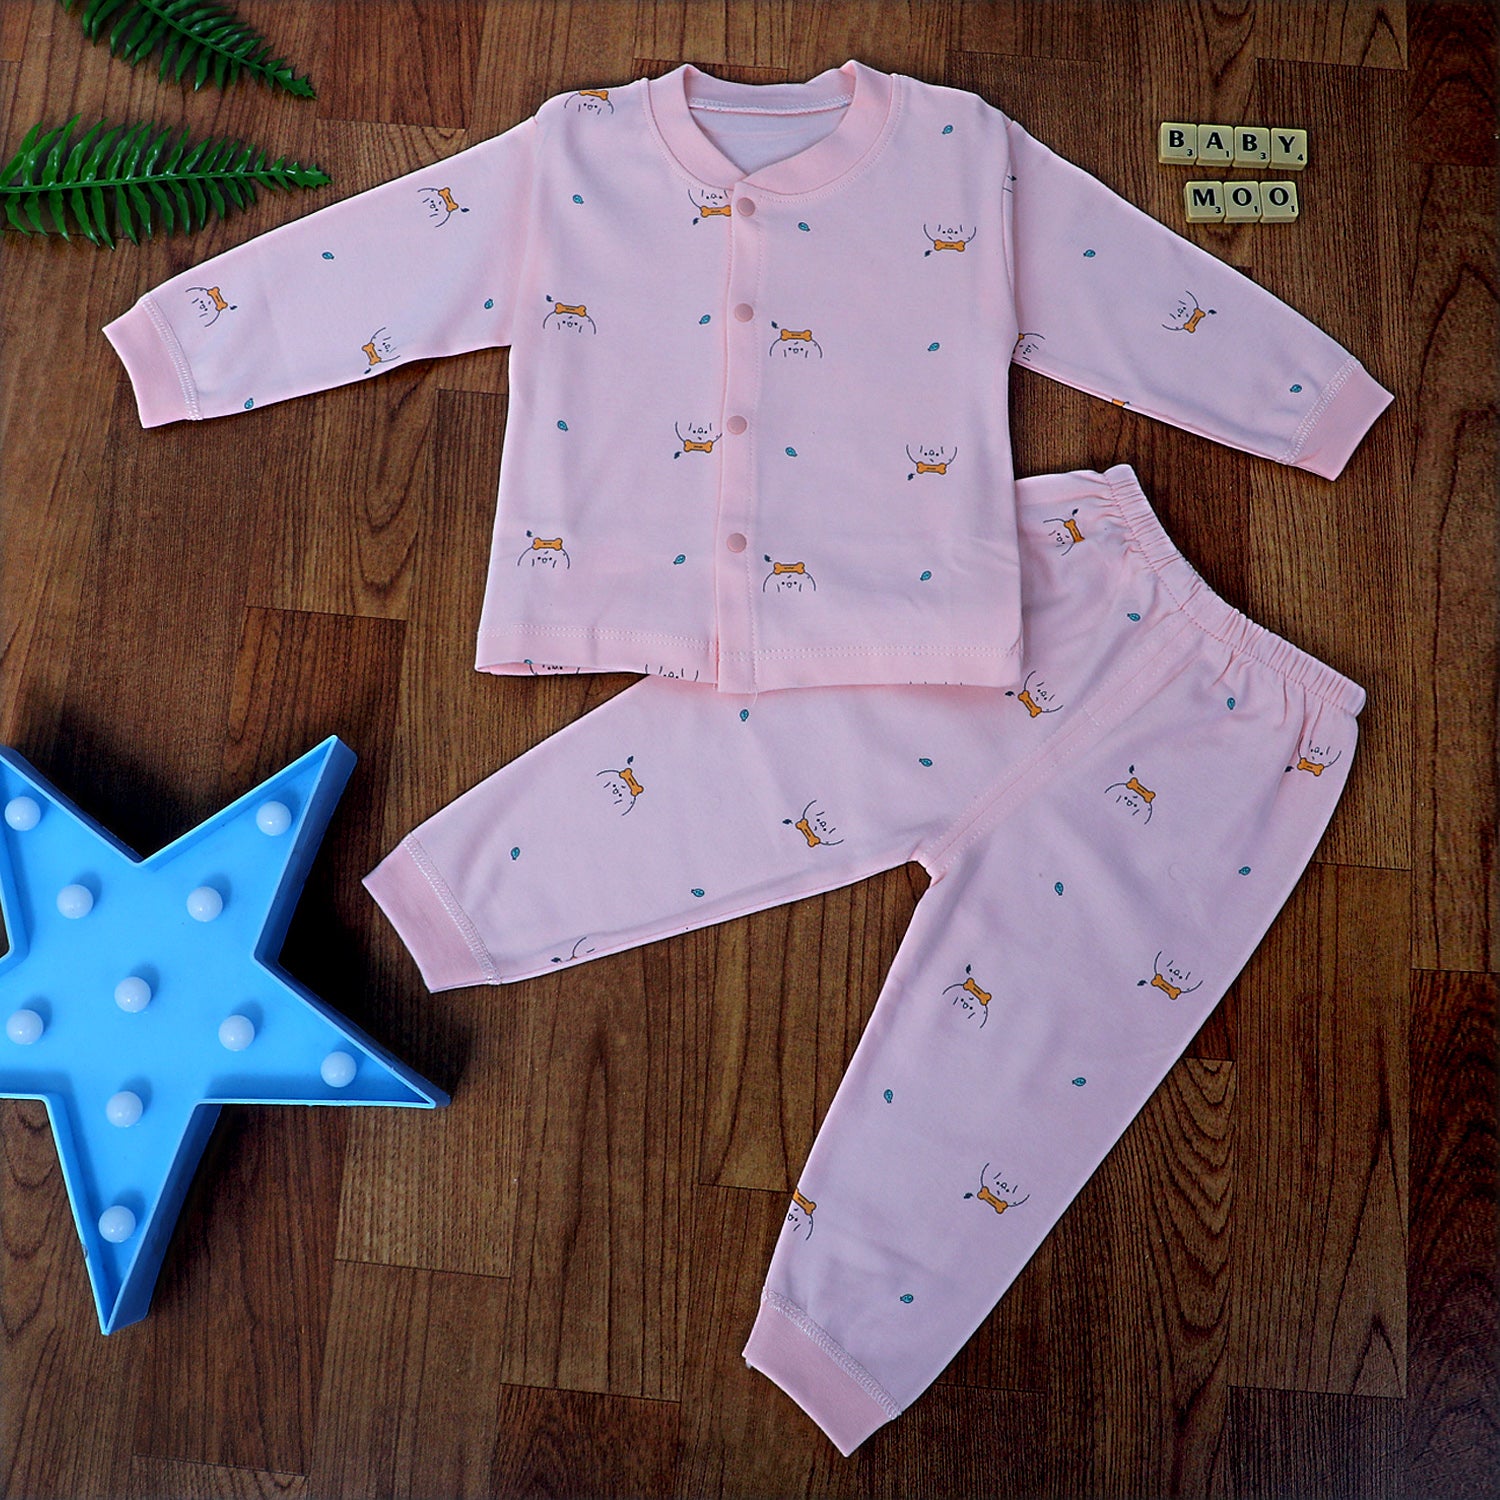 Puppy Face Full Sleeves 2 Piece Buttoned Pyjama Set Night Suit - Pink - Baby Moo